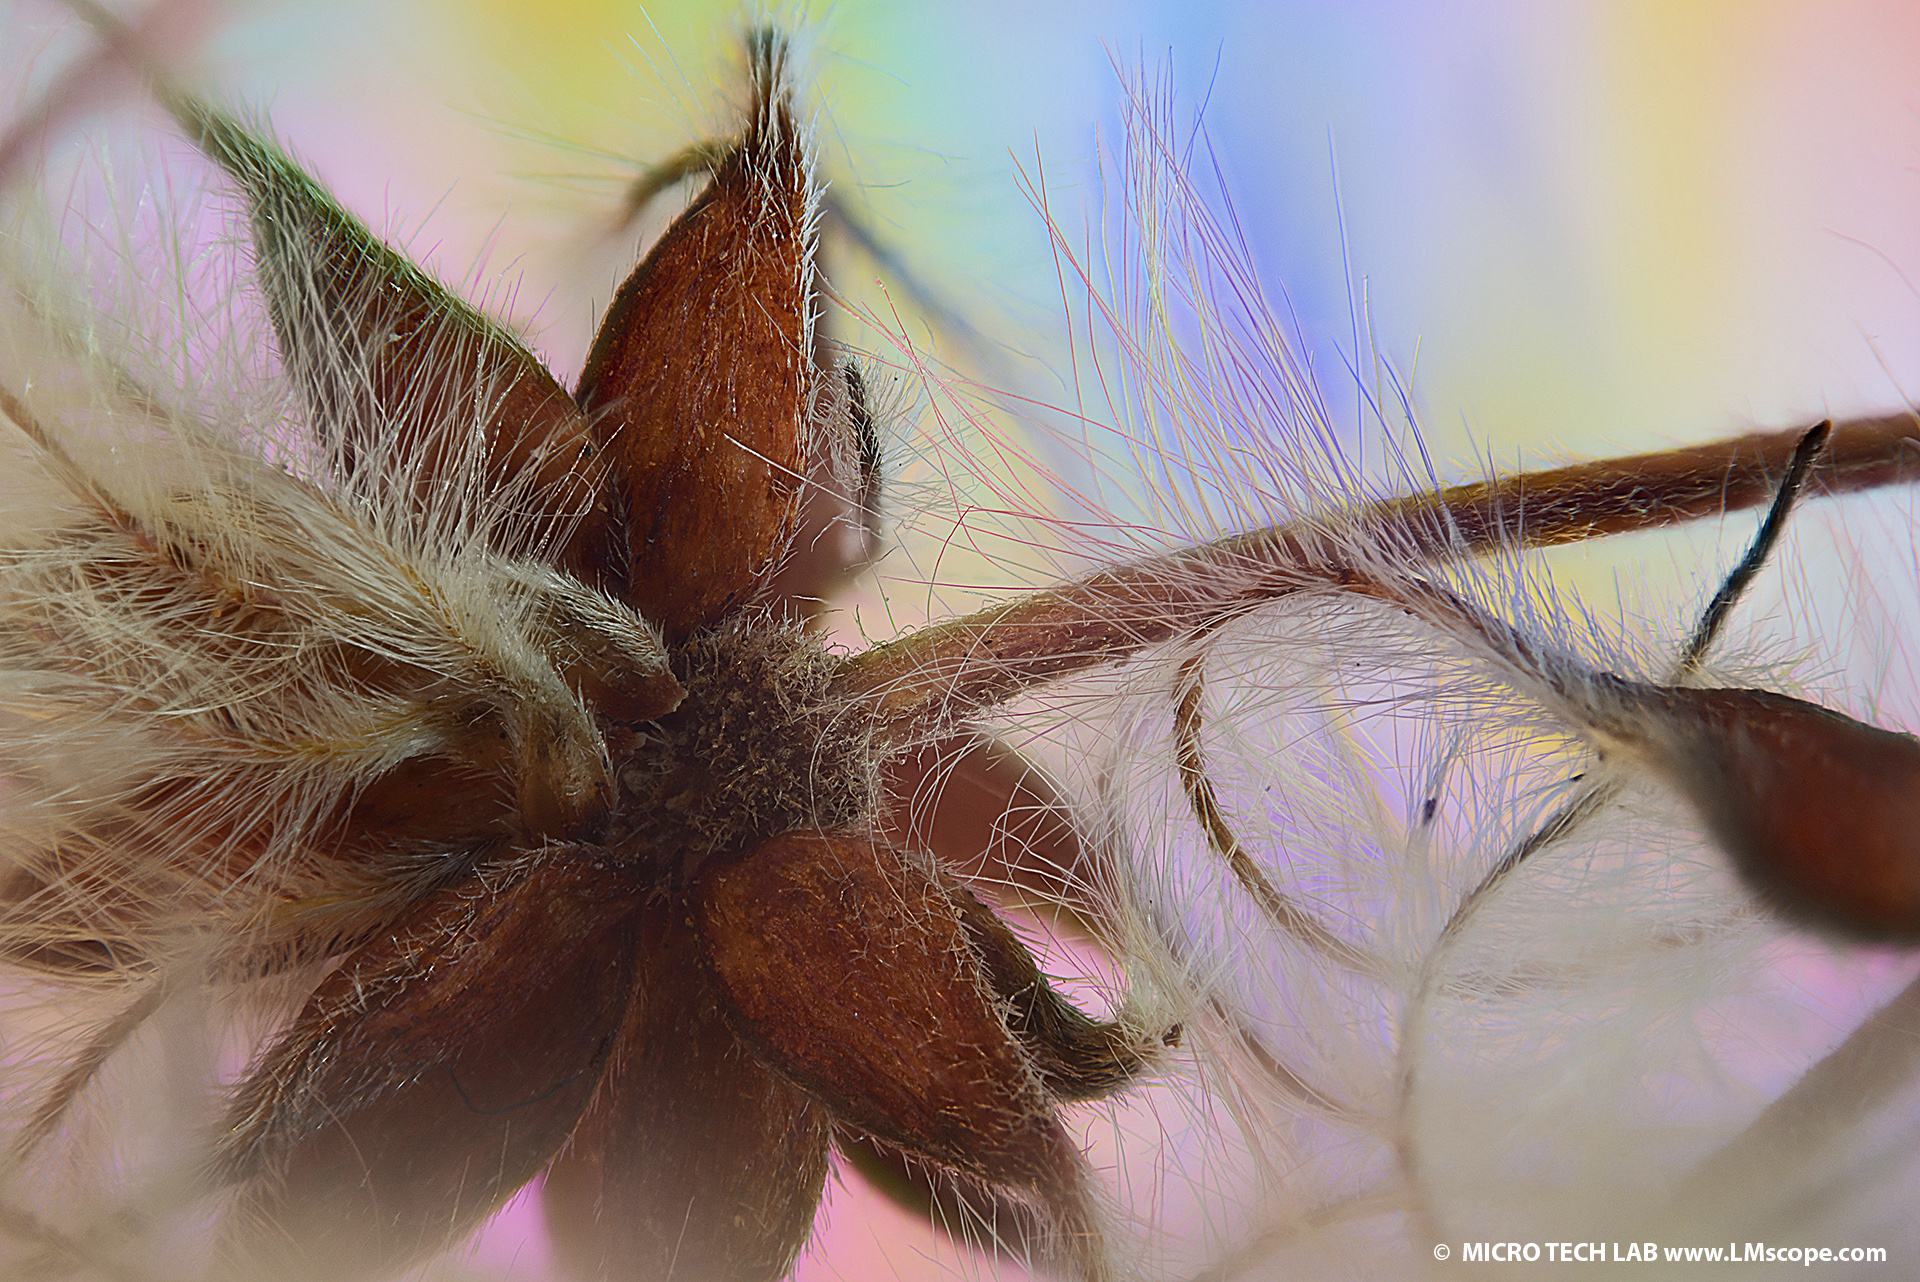 Common clematis seeds